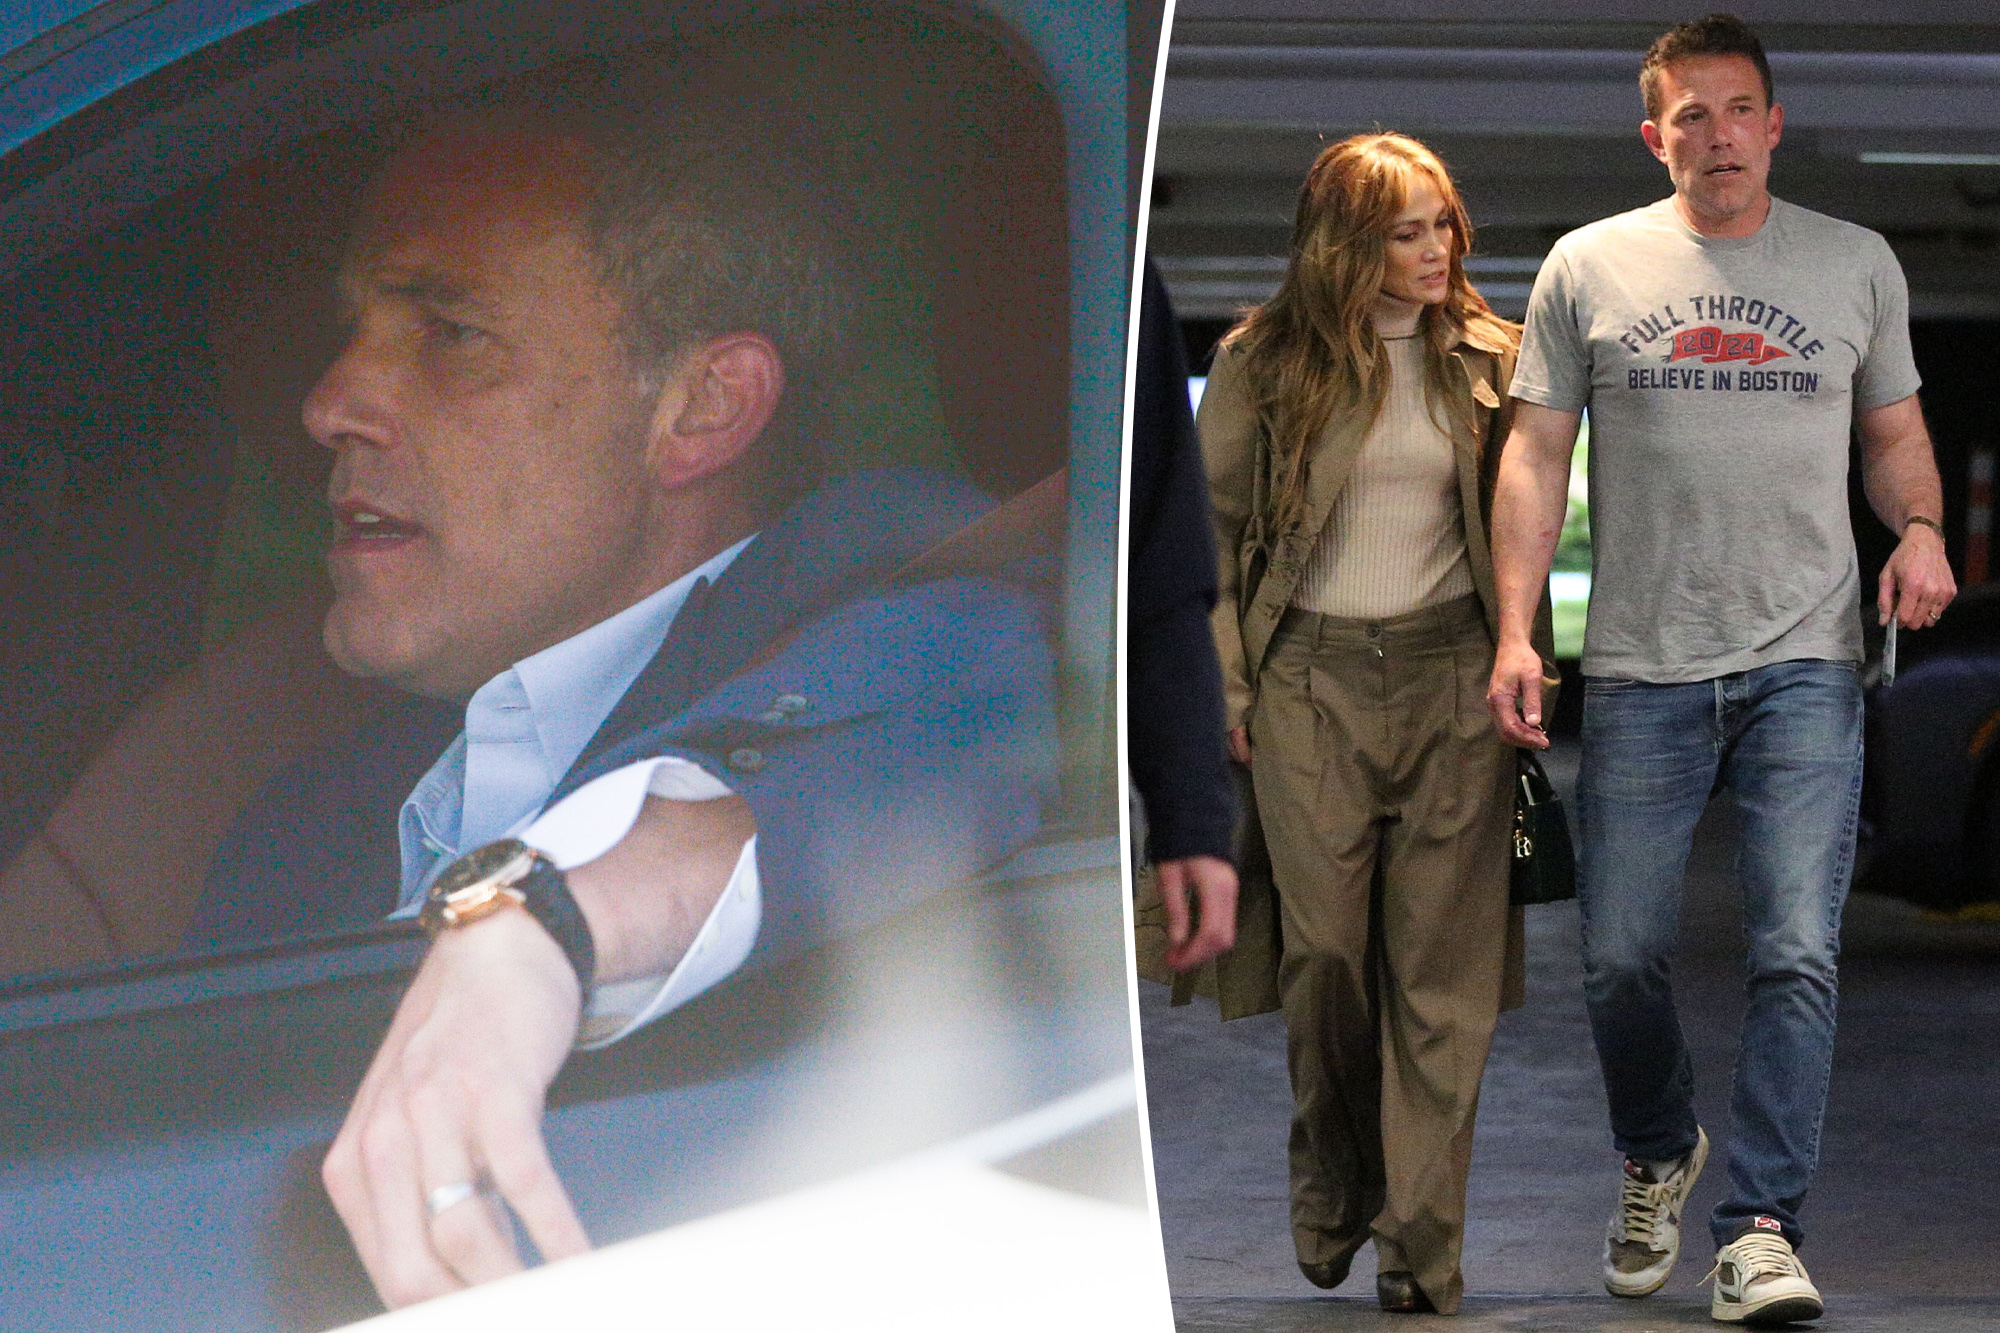 Ben Affleck Flaunts Wedding Ring Amid Marital Drama - What's Next for JLo and Ben?